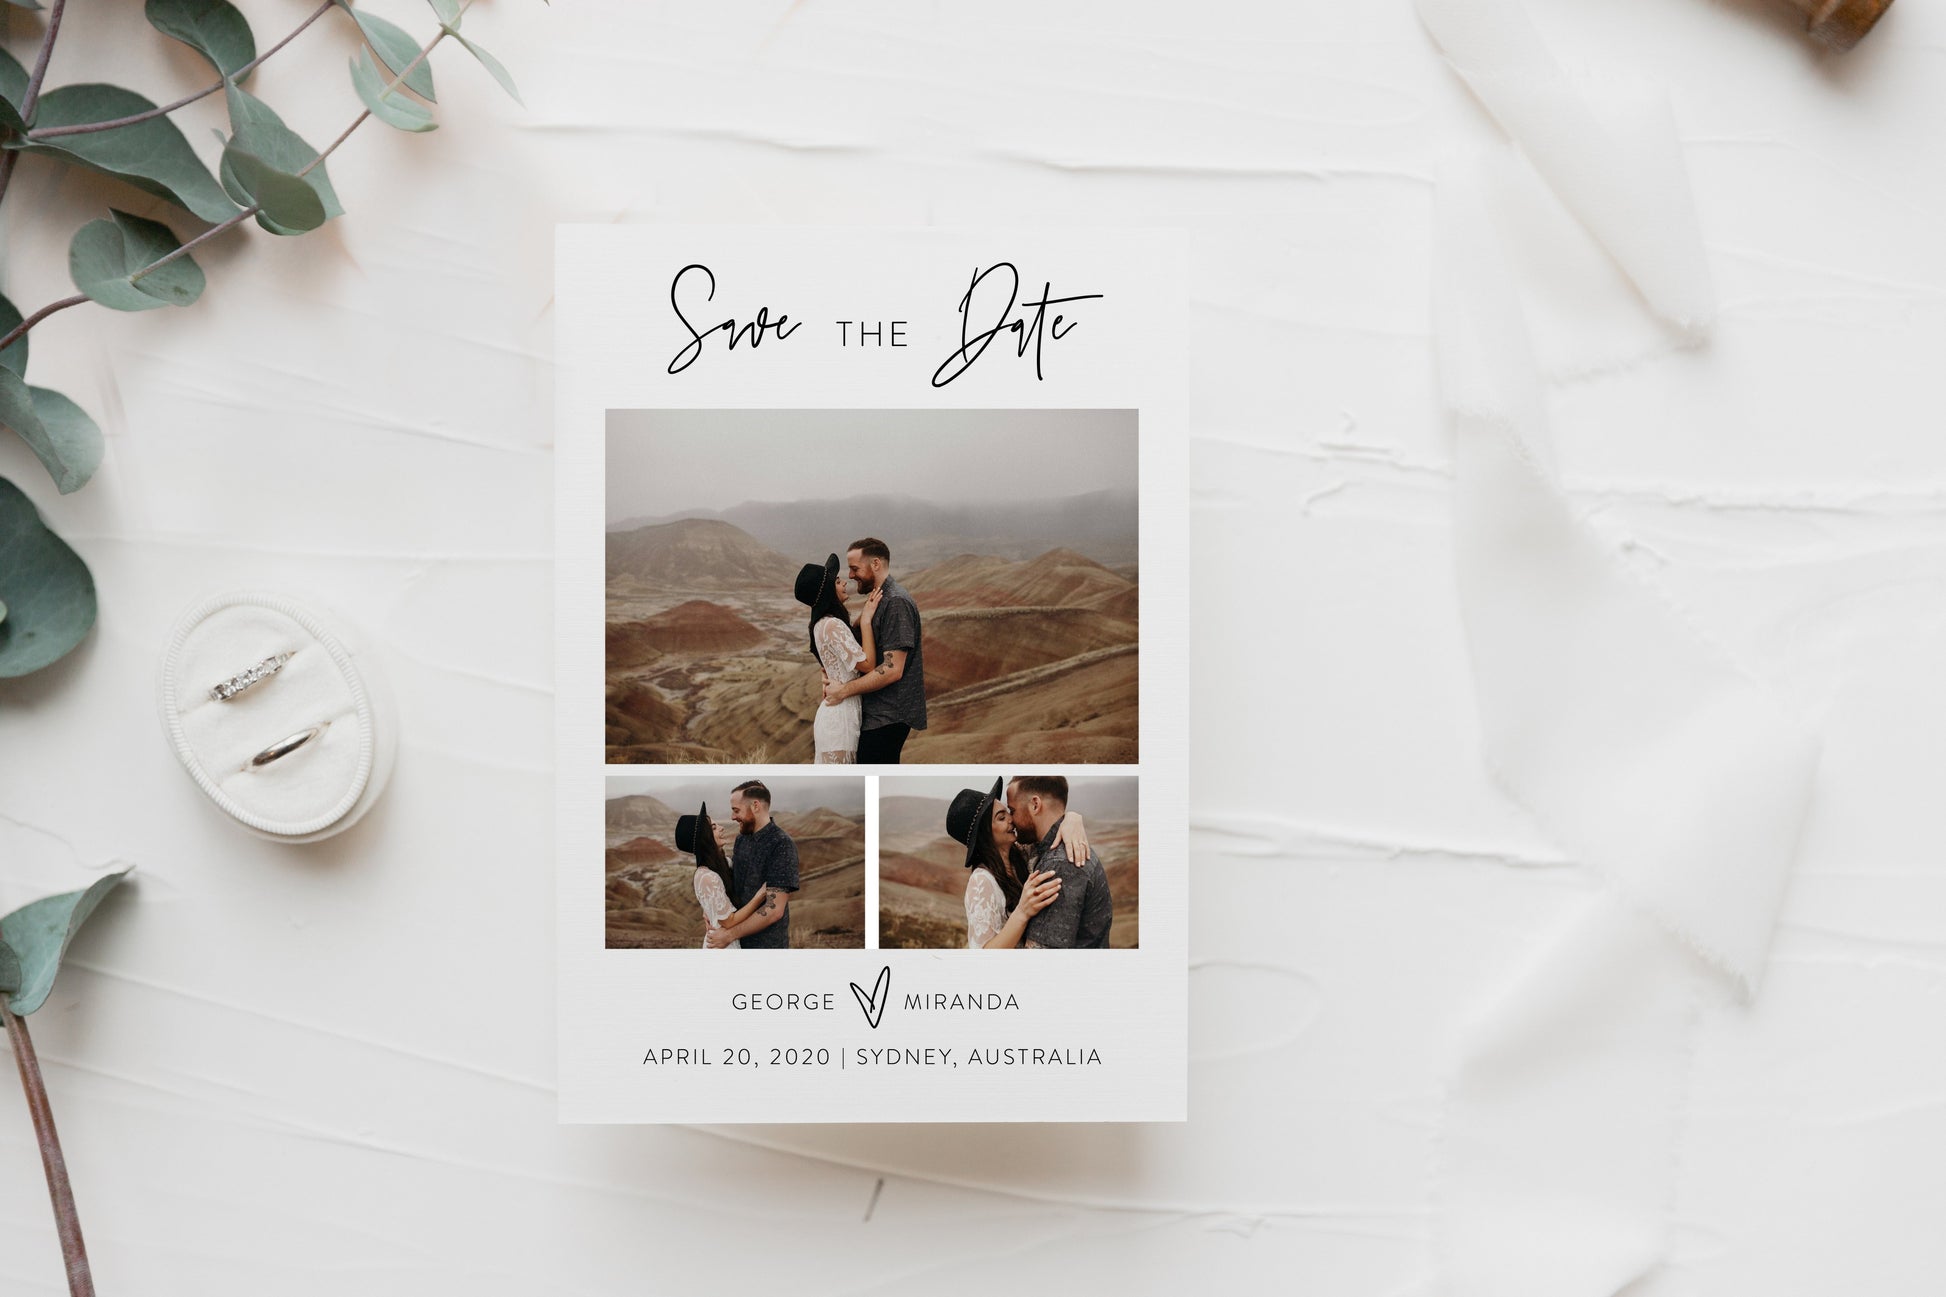 Save the Date Photo Printed Save the Date Card Photo Save the Dates Save the Date with Pictures  [ ]